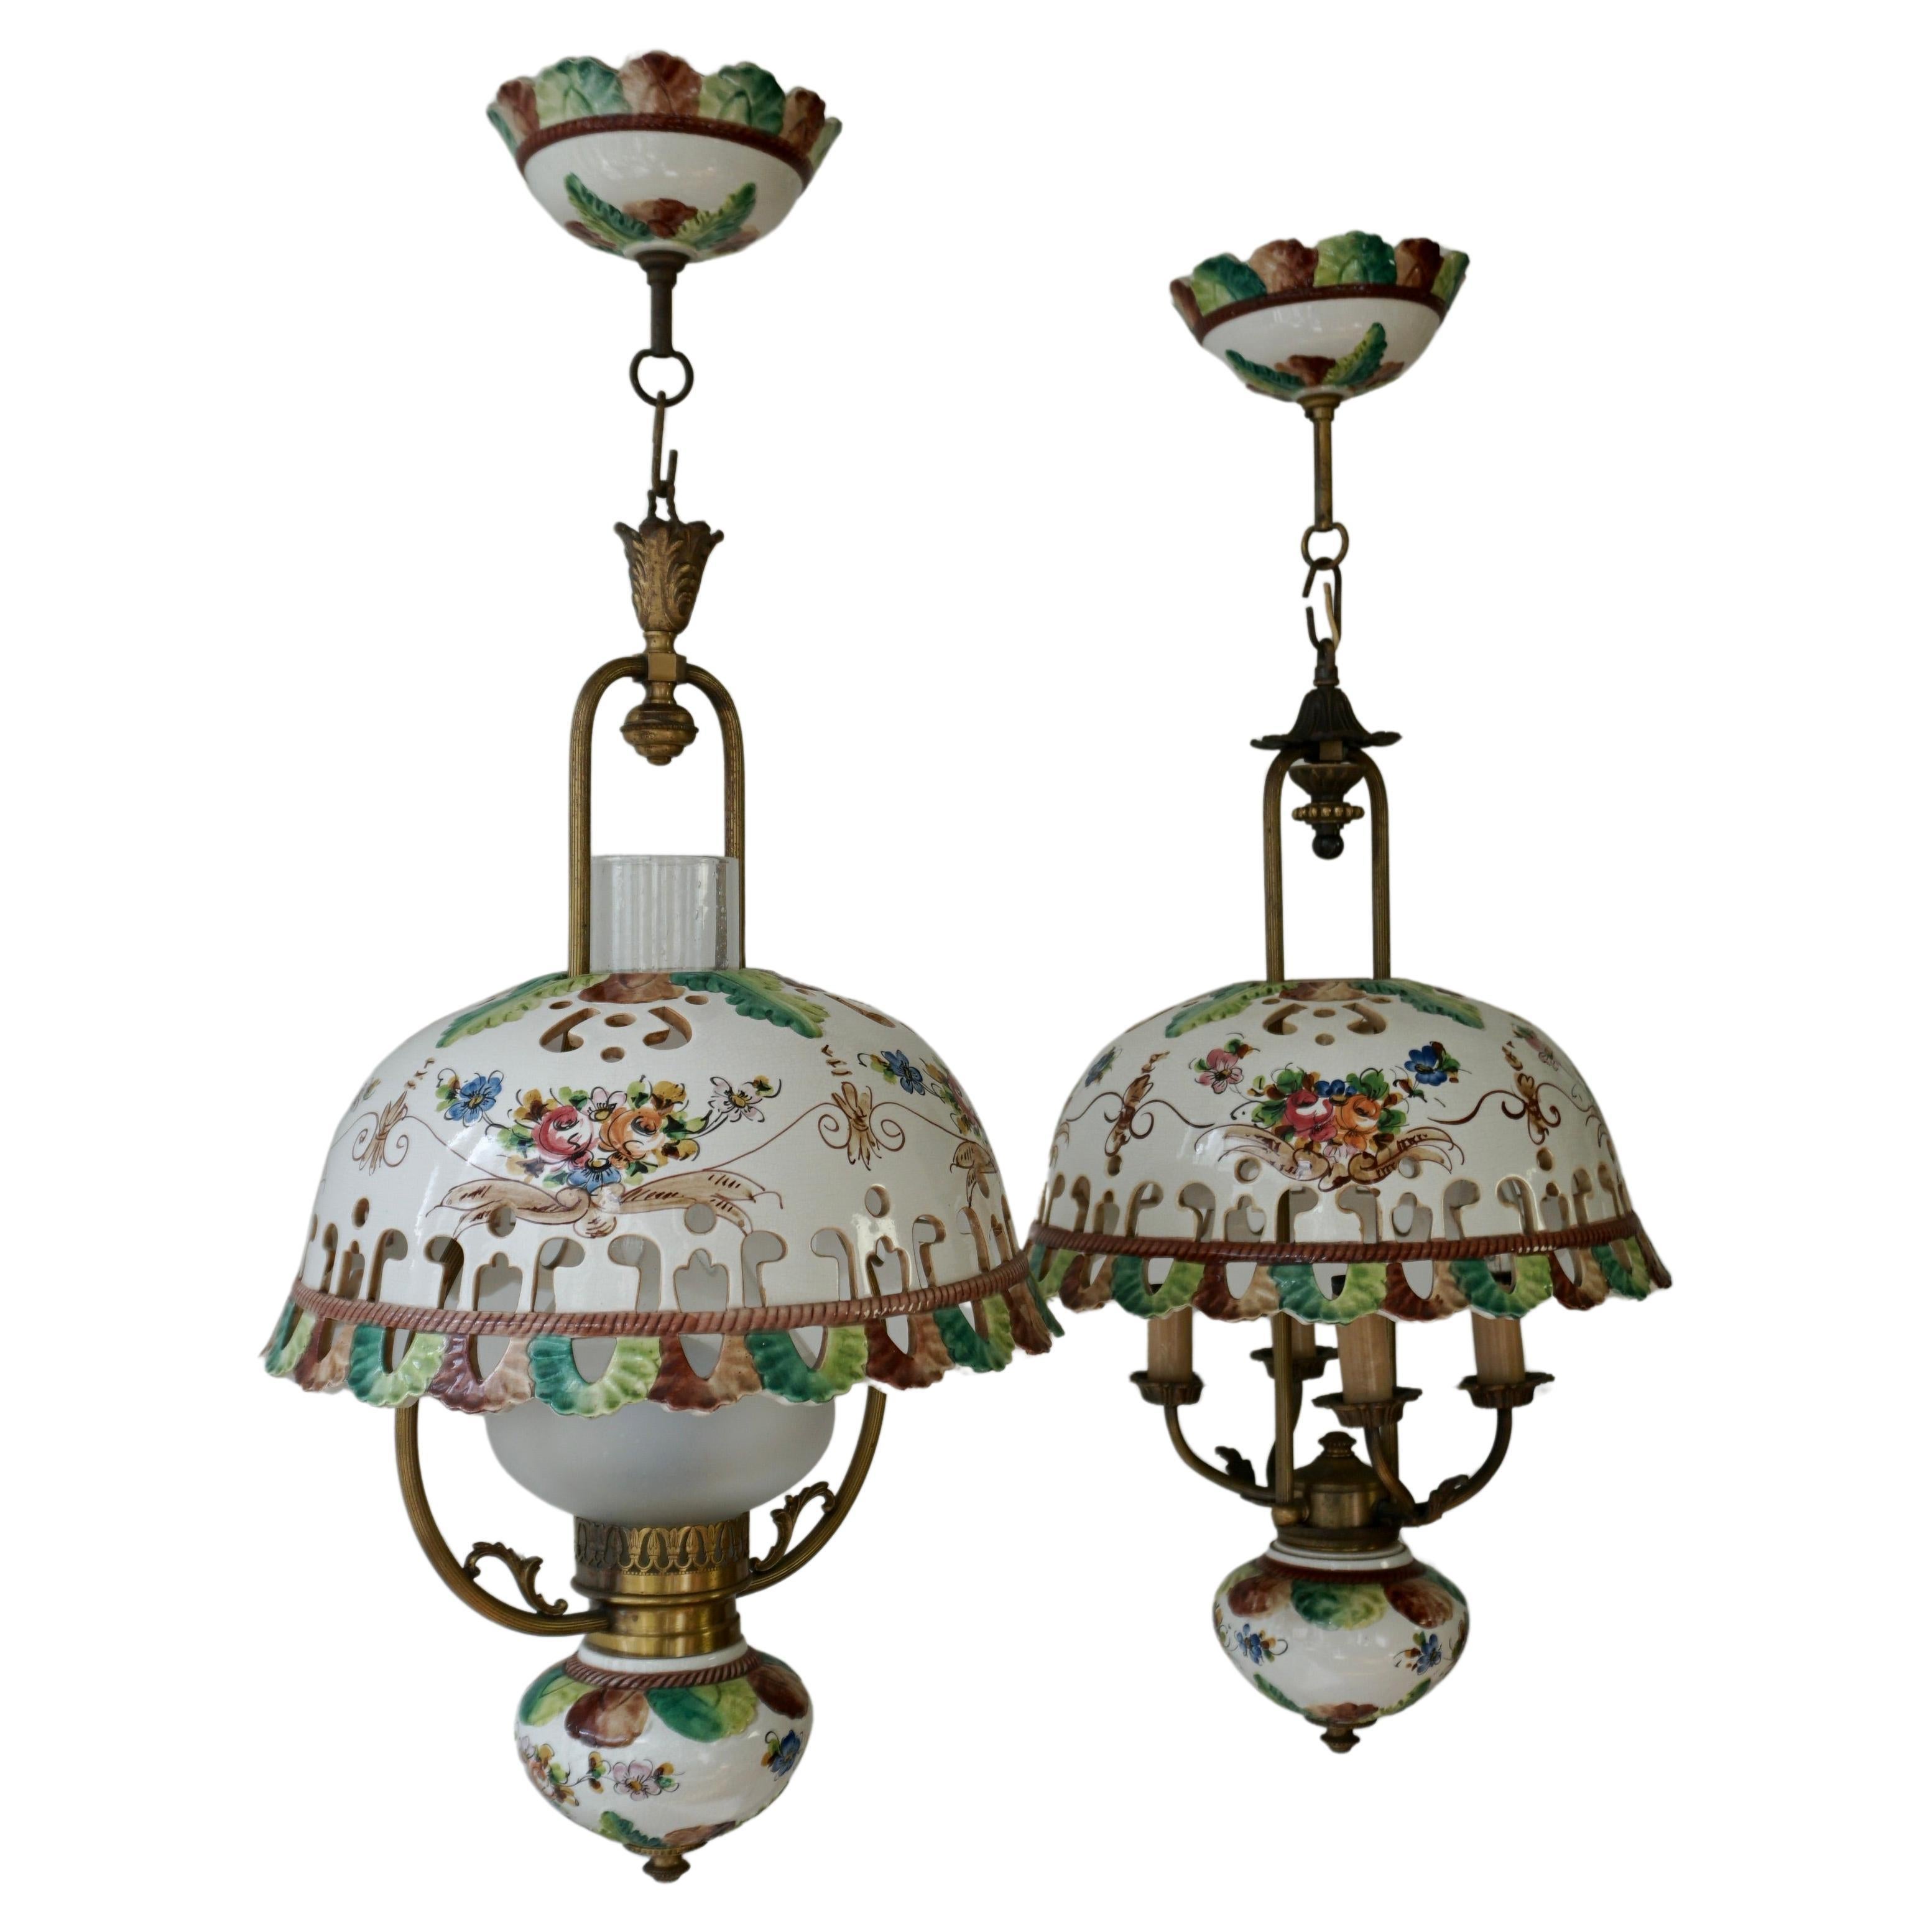 Two Italian ceramic pendant lights painted with flowers.

Diameter 14